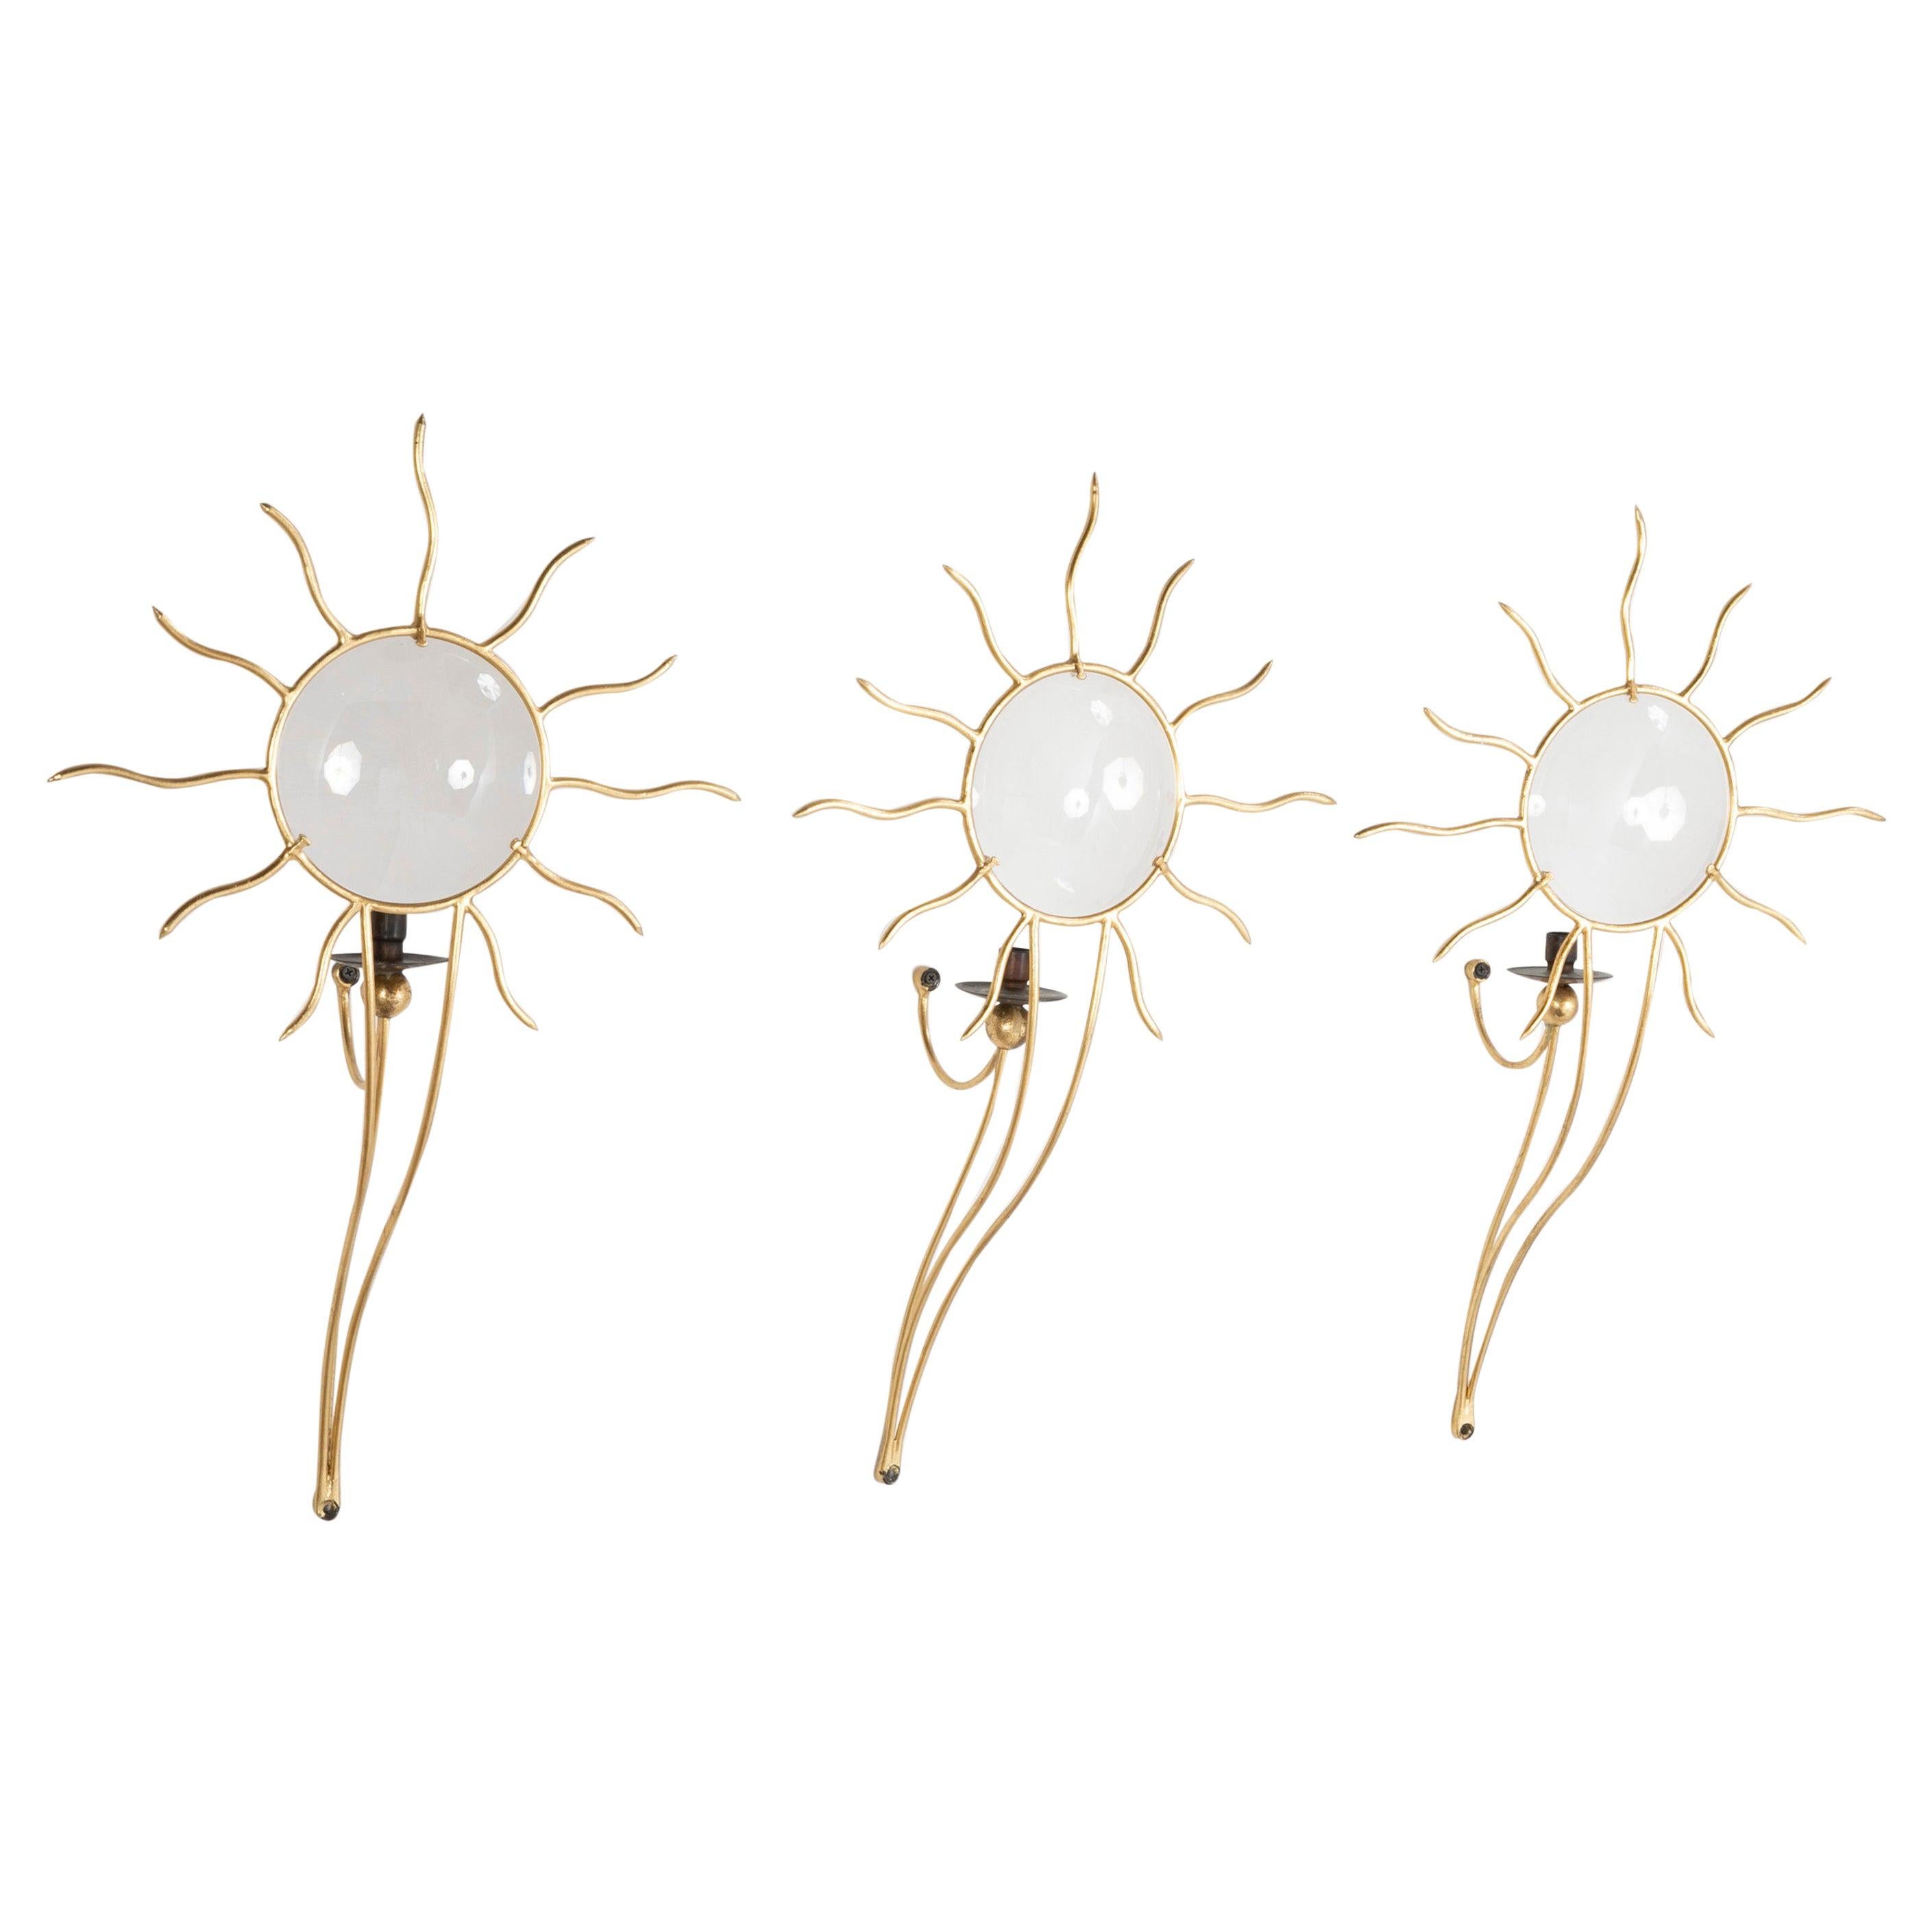 Set of Three Gilt Metal Sconces Designed by Andrea Dubreuil